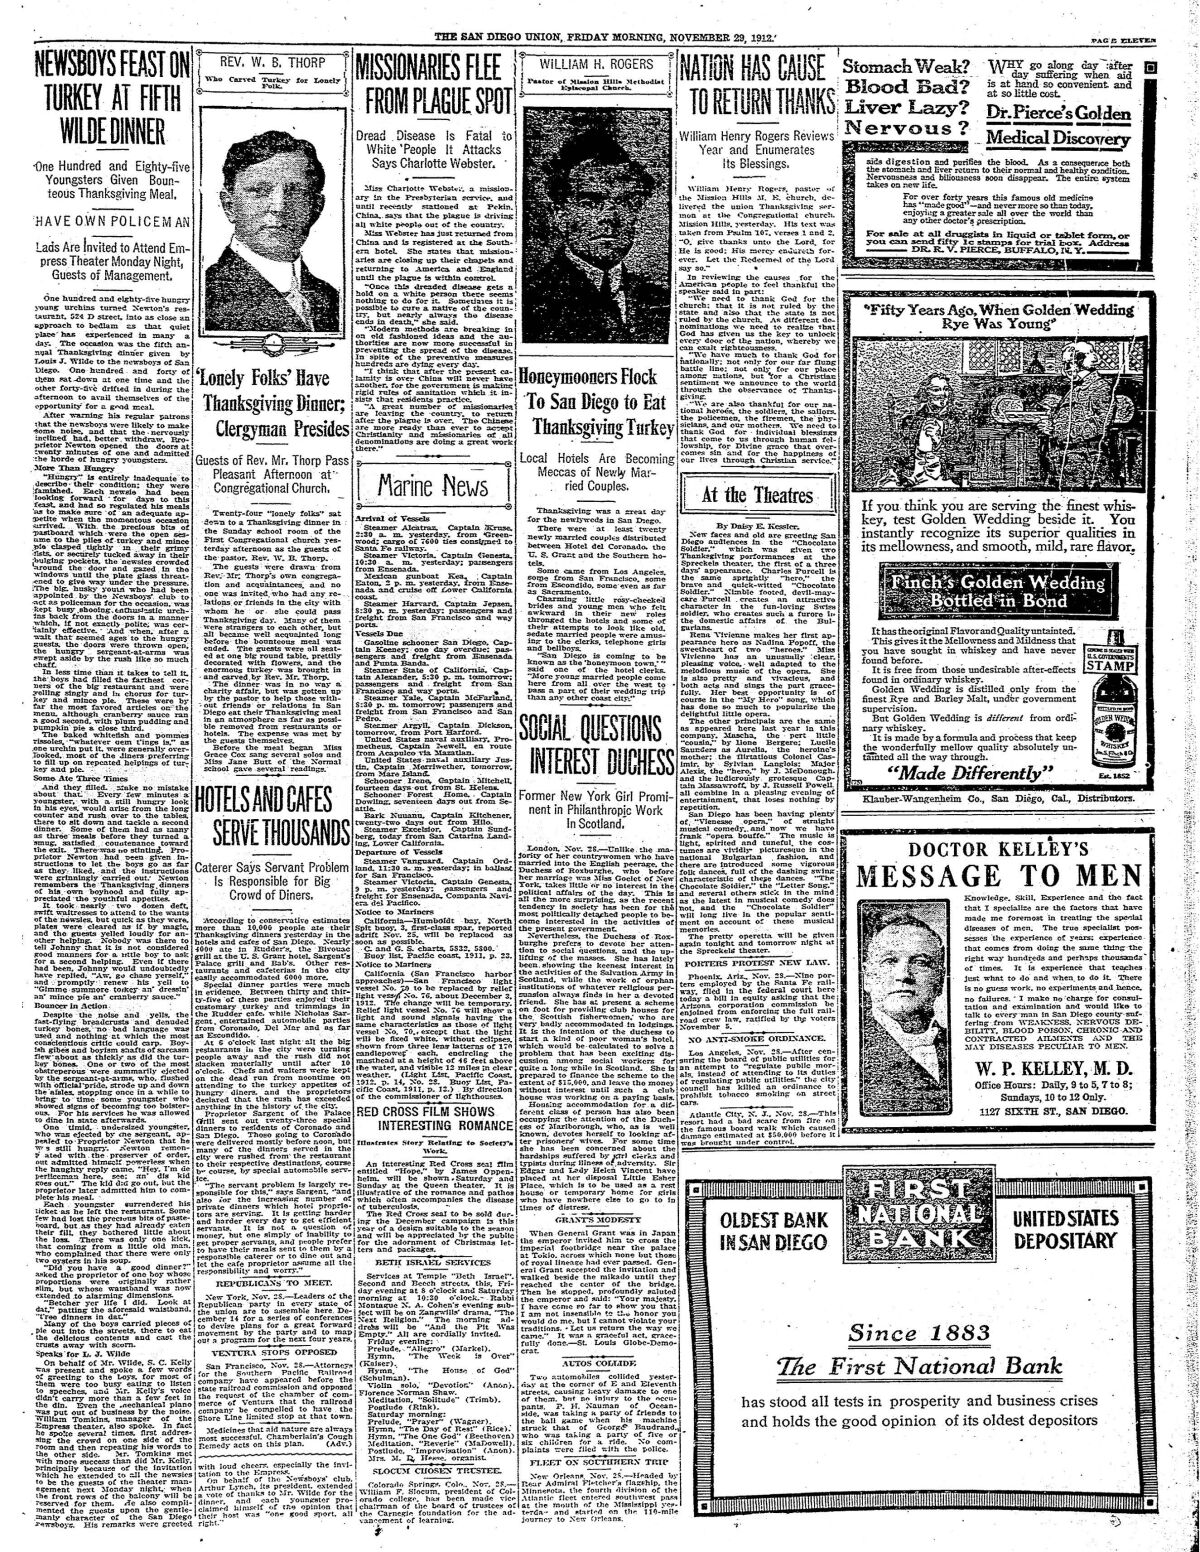 "NEWSBOYS FEAST ON TURKEY AT FIFTH WILDE DINNER," From The San Diego Union and Daily Bee, Friday, Nov. 29, 1912.